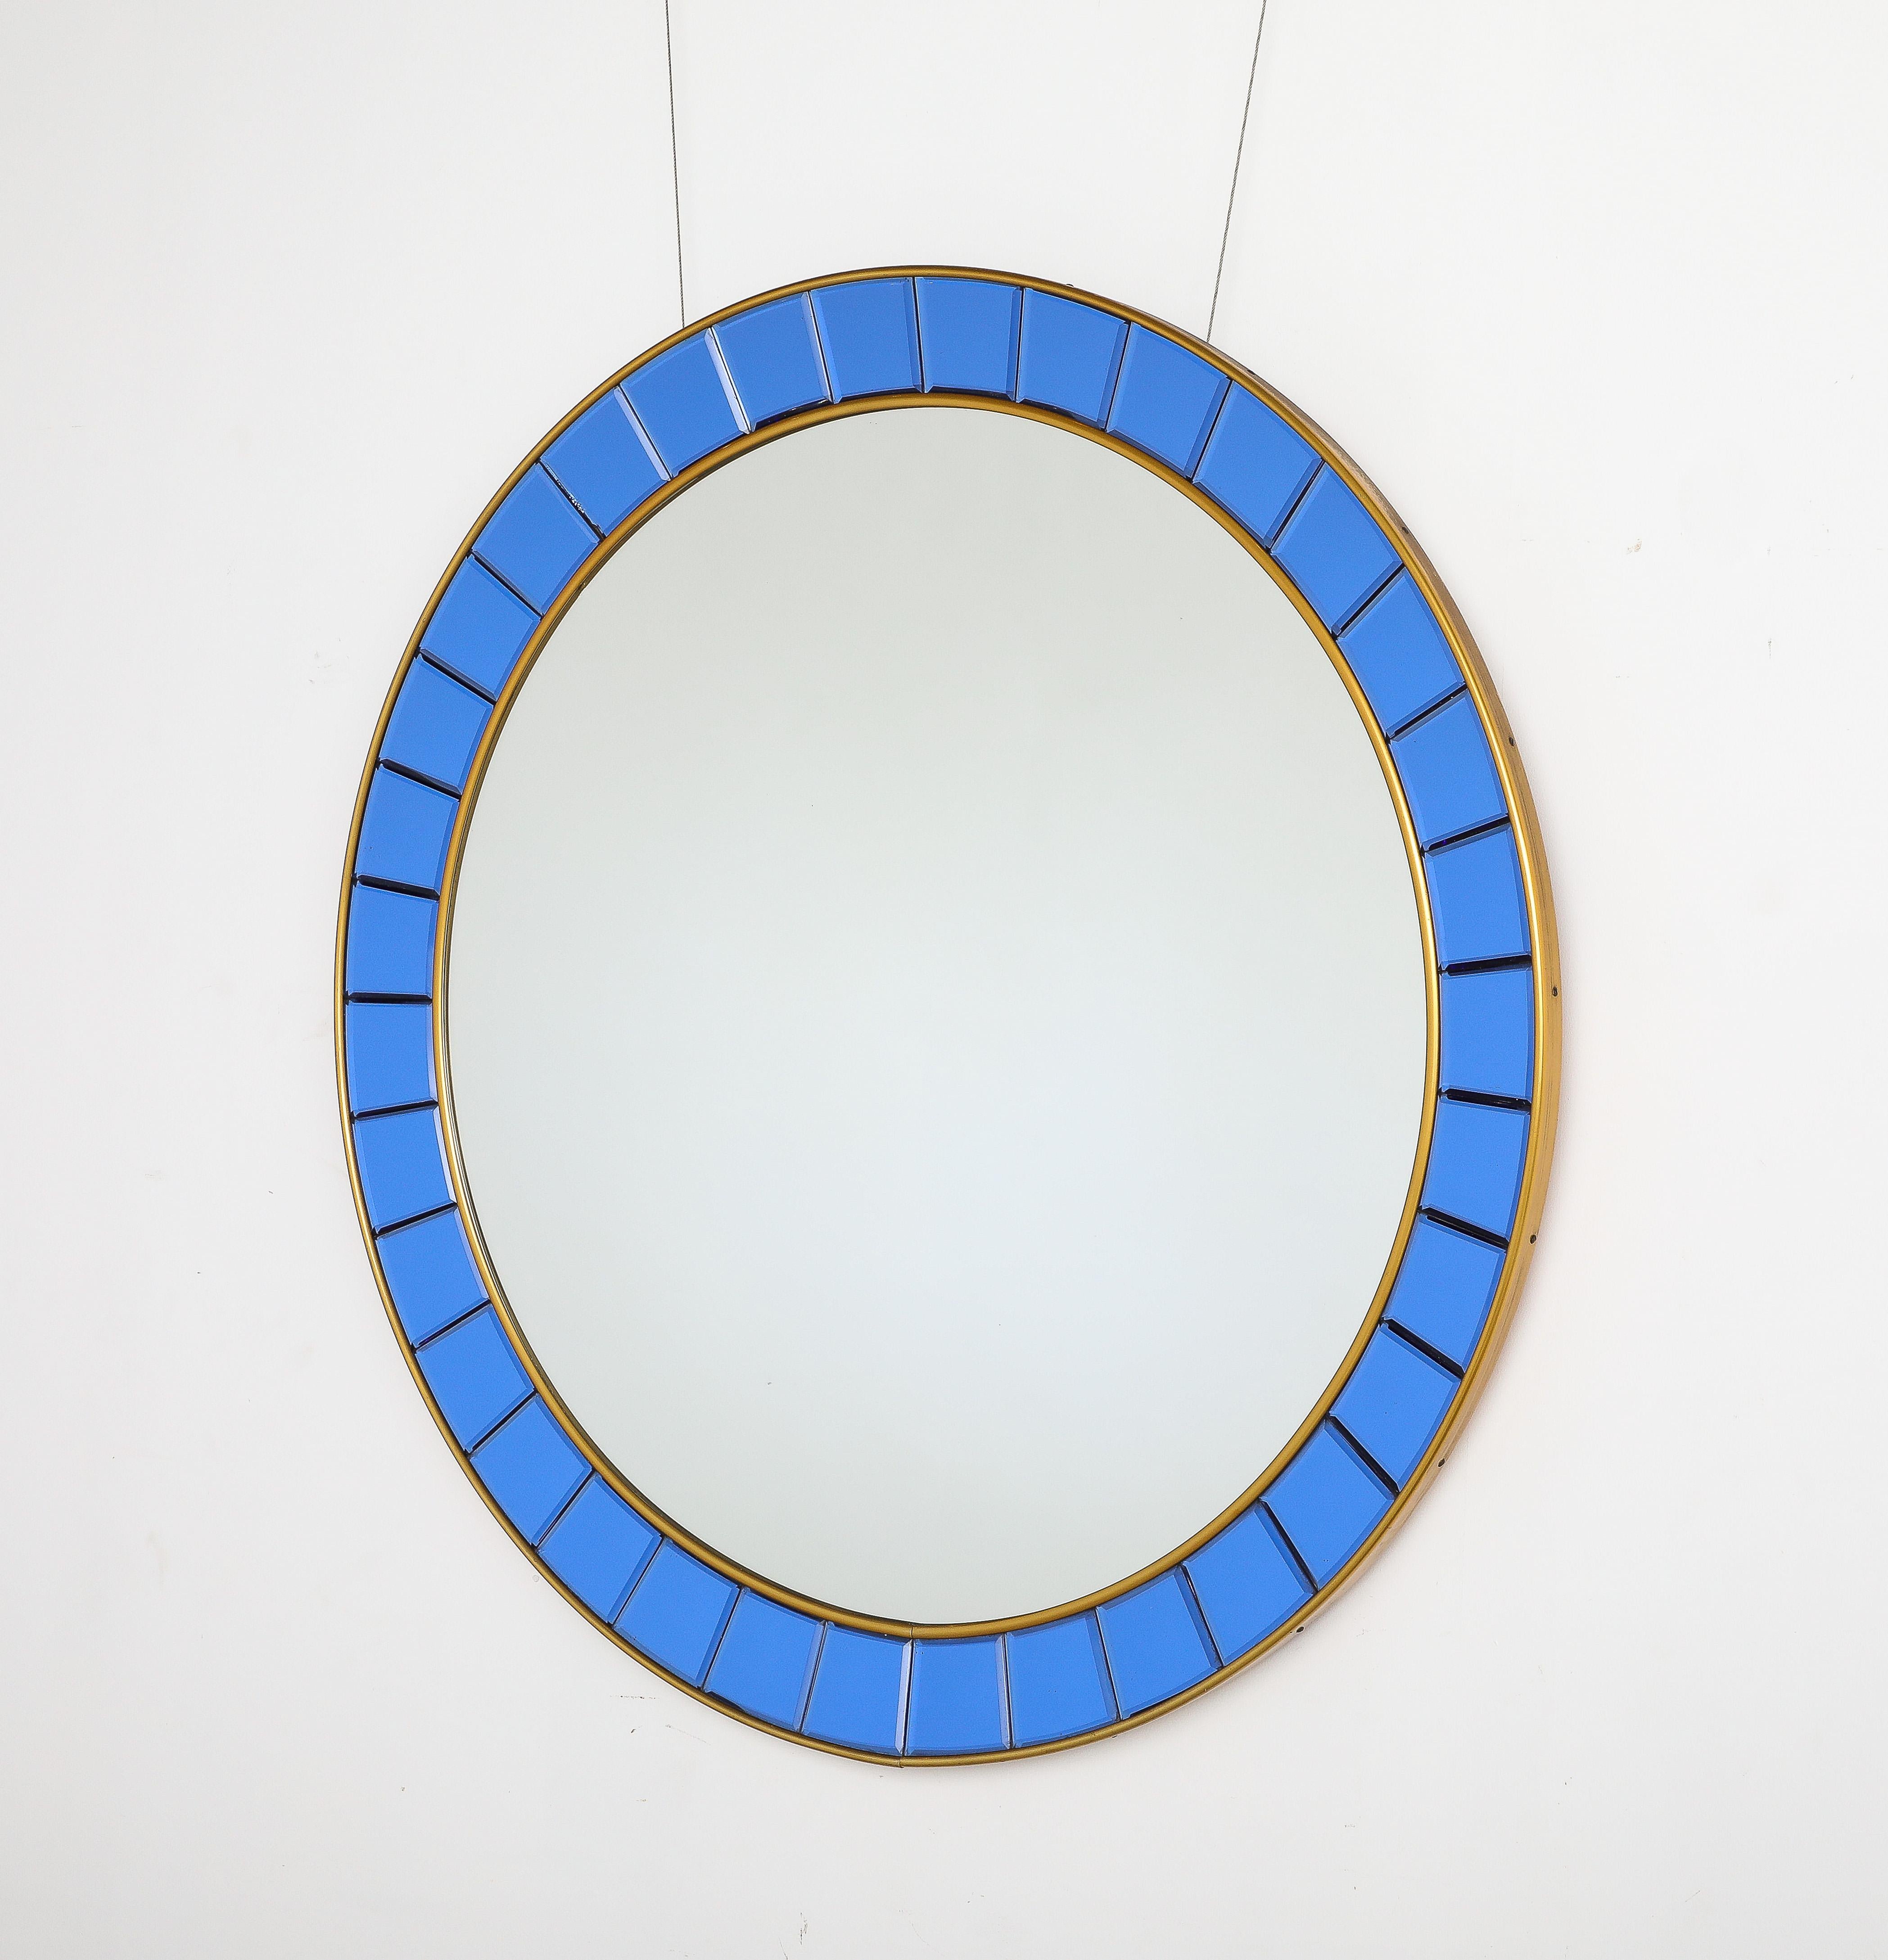 A Cristal Art circular wall mirror, model No. 2679.  

The circular form with hand-crafted beveled or faceted crystal glass pieces framed by gilt-brass borders and outer molding. The faceted glass pieces are realized in a stunning electrifying blue